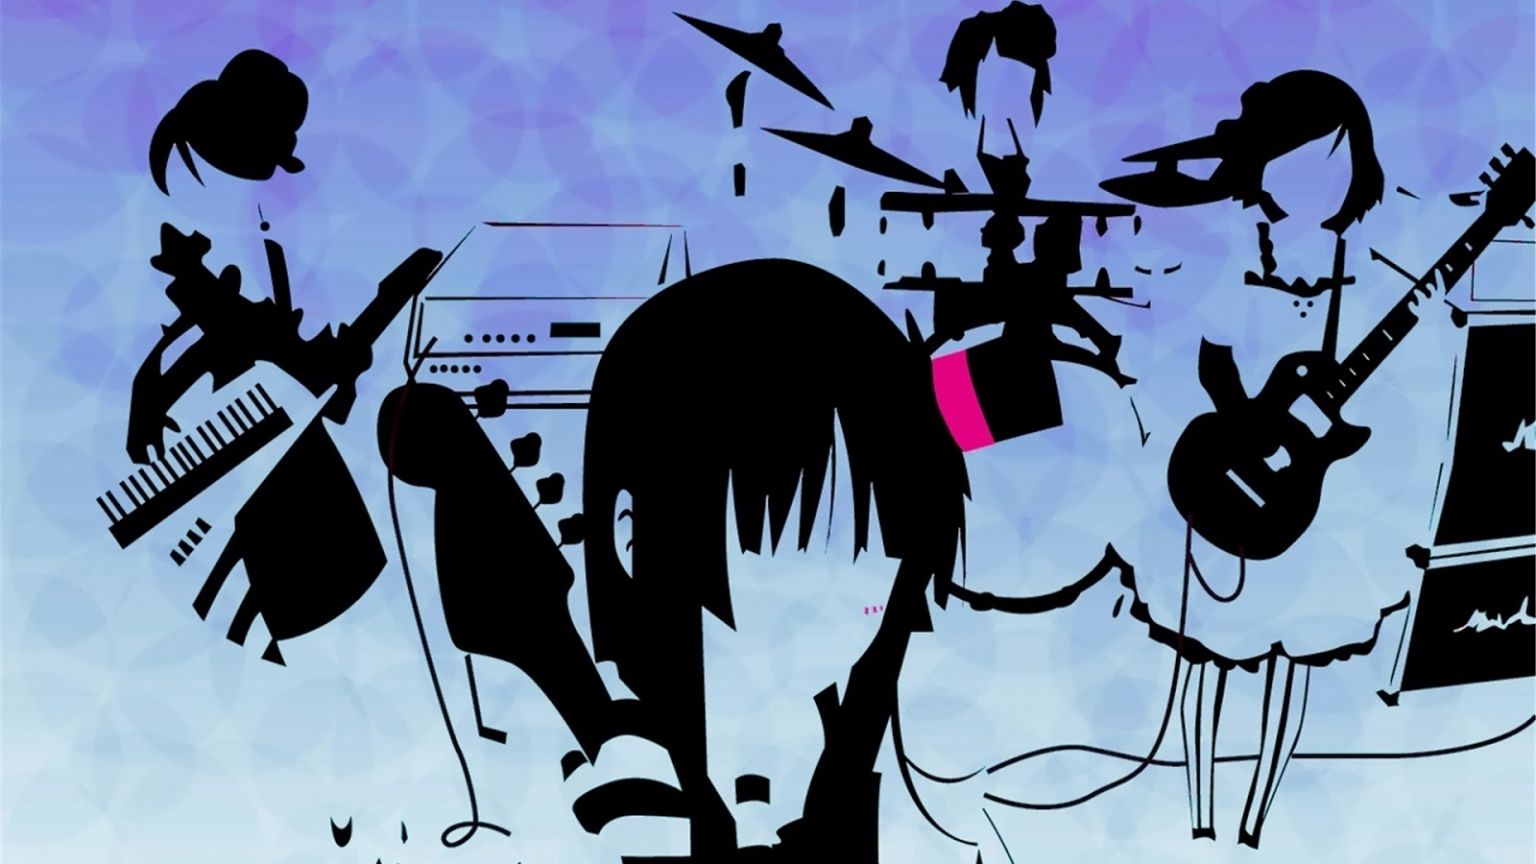 Free download on anime girl band music instrument wallpaper HD